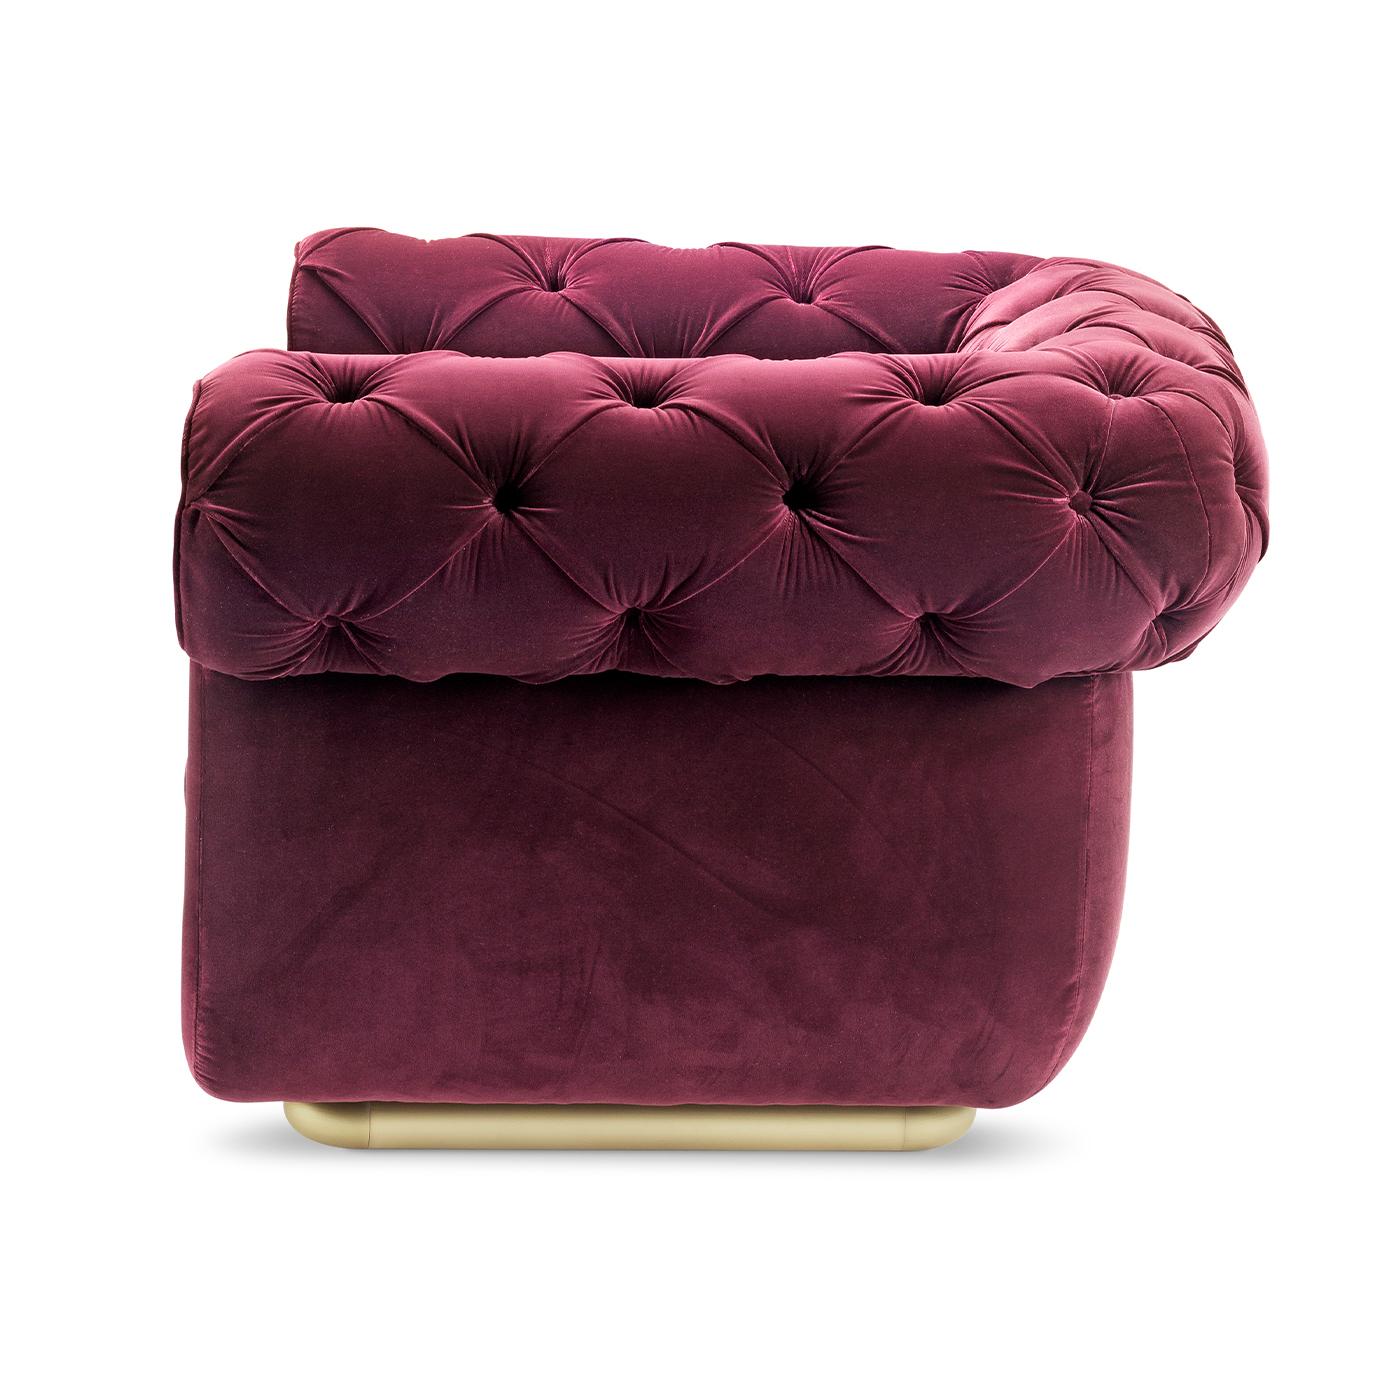 Gem of unrivaled tailored craftsmanship, this armchair will find ideal placement in an exclusive bedroom or living room, where it will distill its glamorous personality. Richly padded and upholstered in purple, velvety fabric, the plush volumes